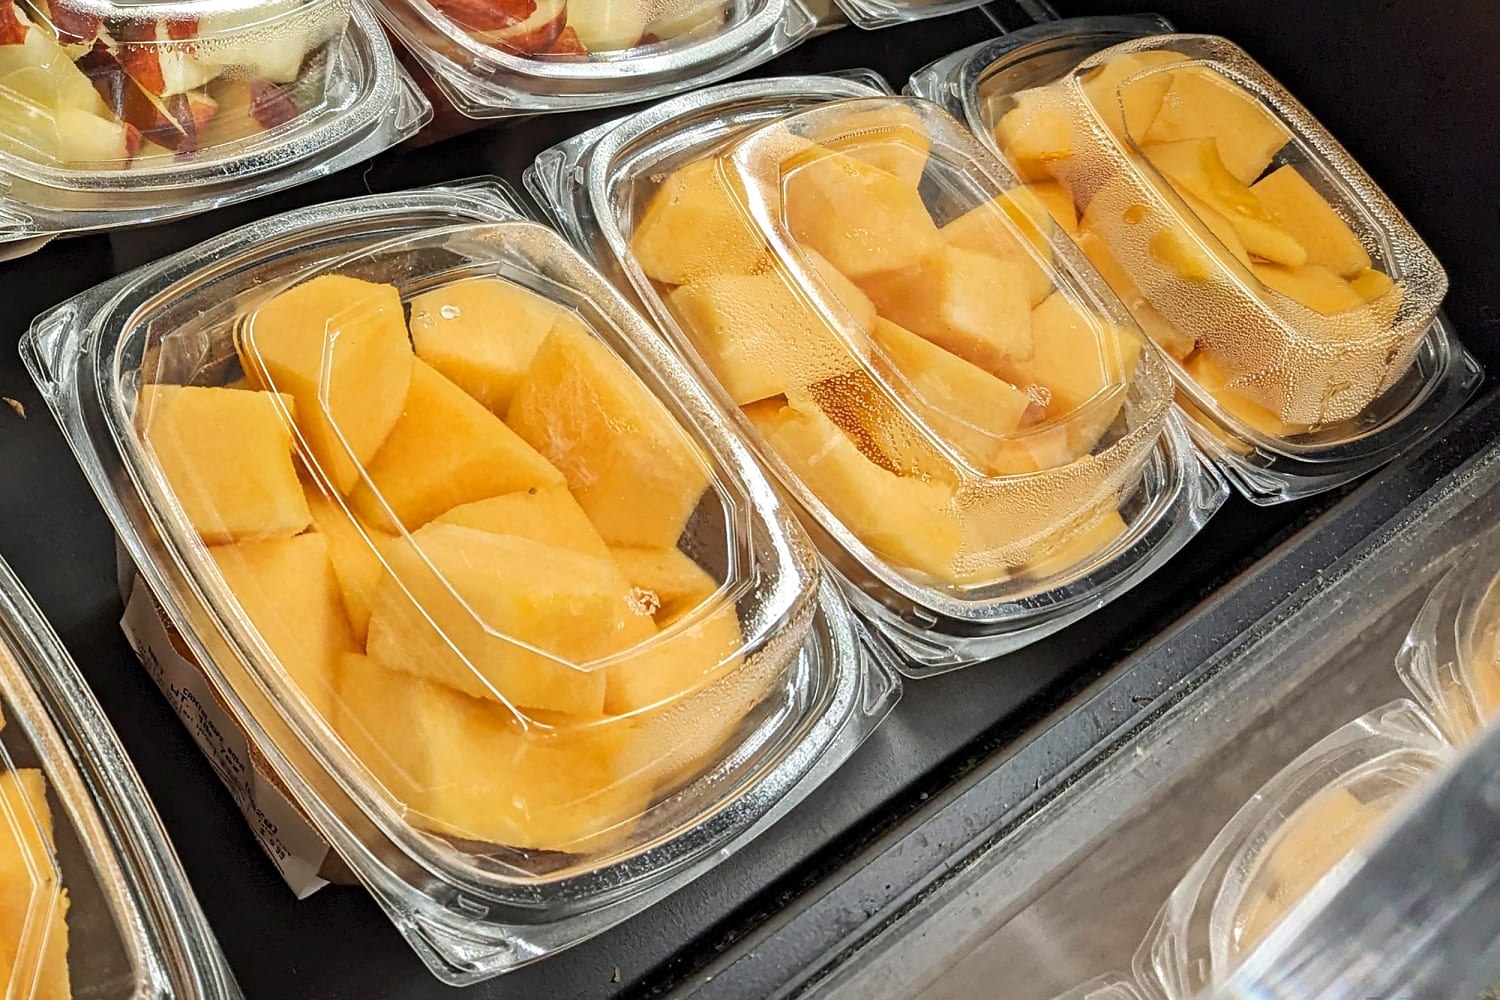 Deaths from tainted cantaloupe increase to 8 in U.S. and Canada